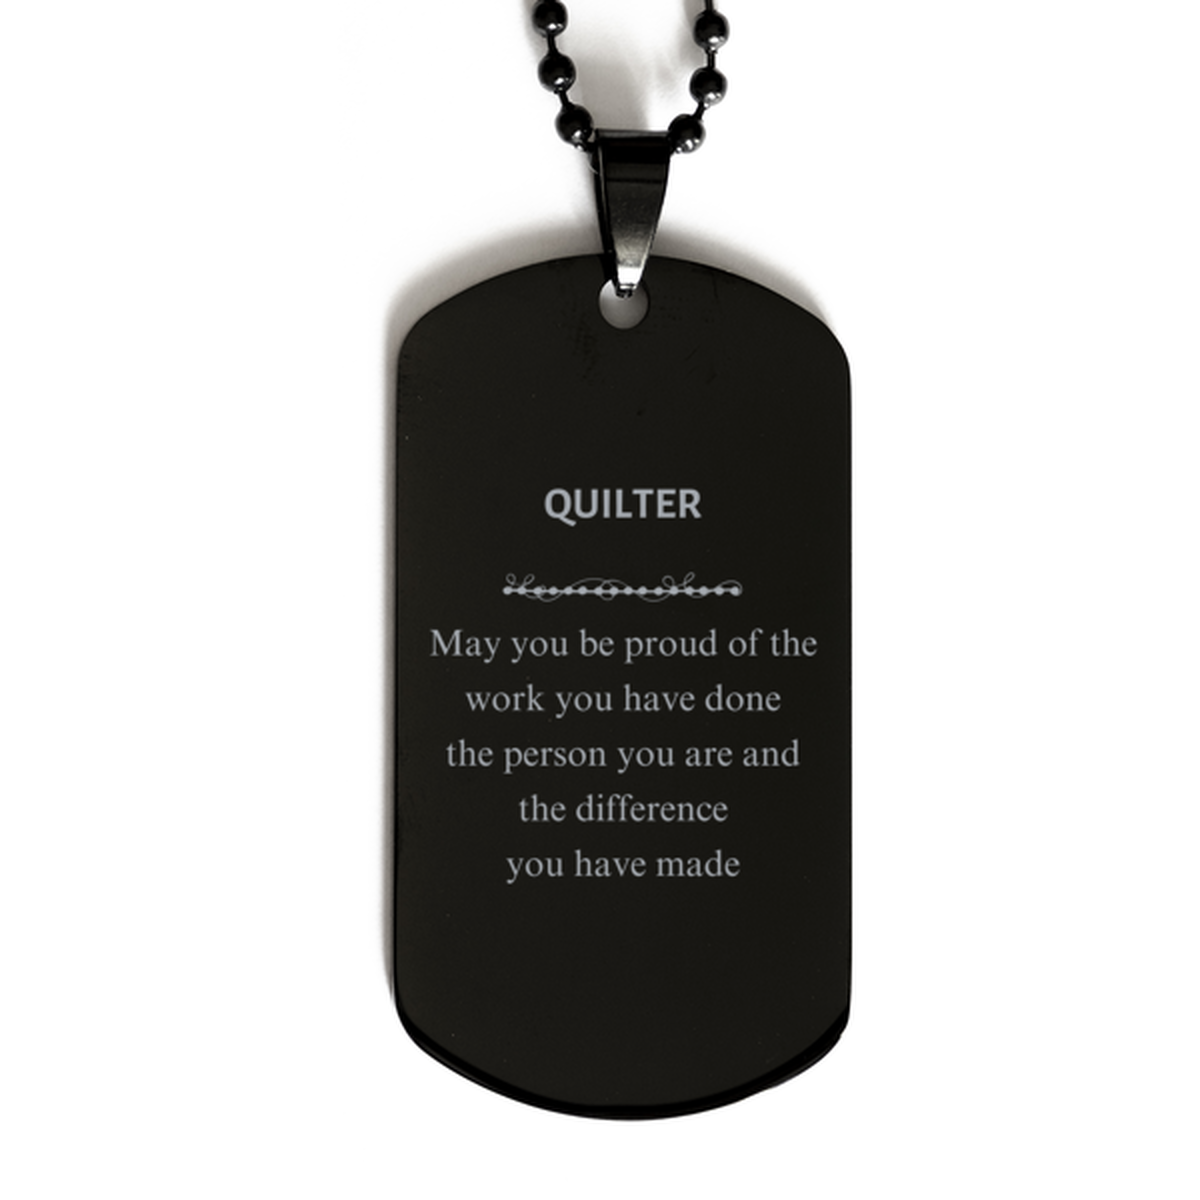 Quilter May you be proud of the work you have done, Retirement Quilter Black Dog Tag for Colleague Appreciation Gifts Amazing for Quilter